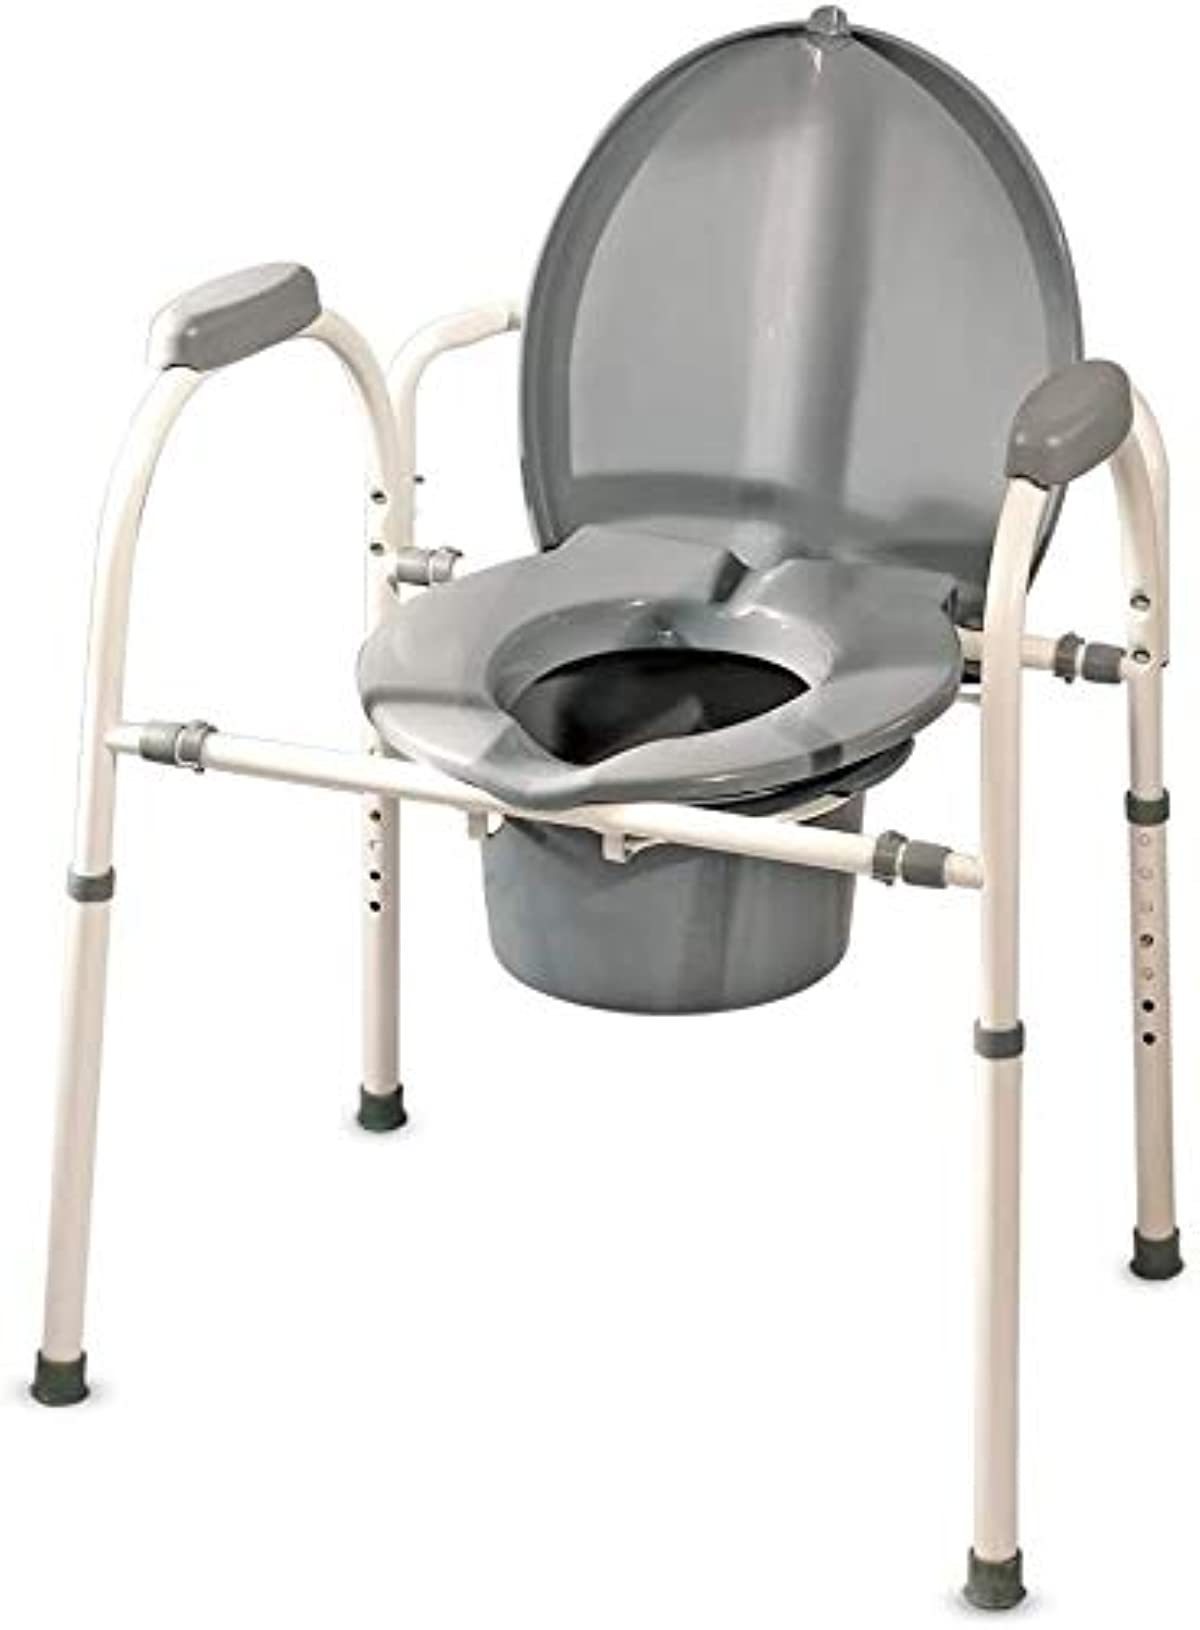 MedPro Defense Comfort Plus Commode Chair with Adjustable Height and Extra Wide Ergonomic Seat, Convenient and Safer Toilet Alternative, Flexible Frame Design, Gray